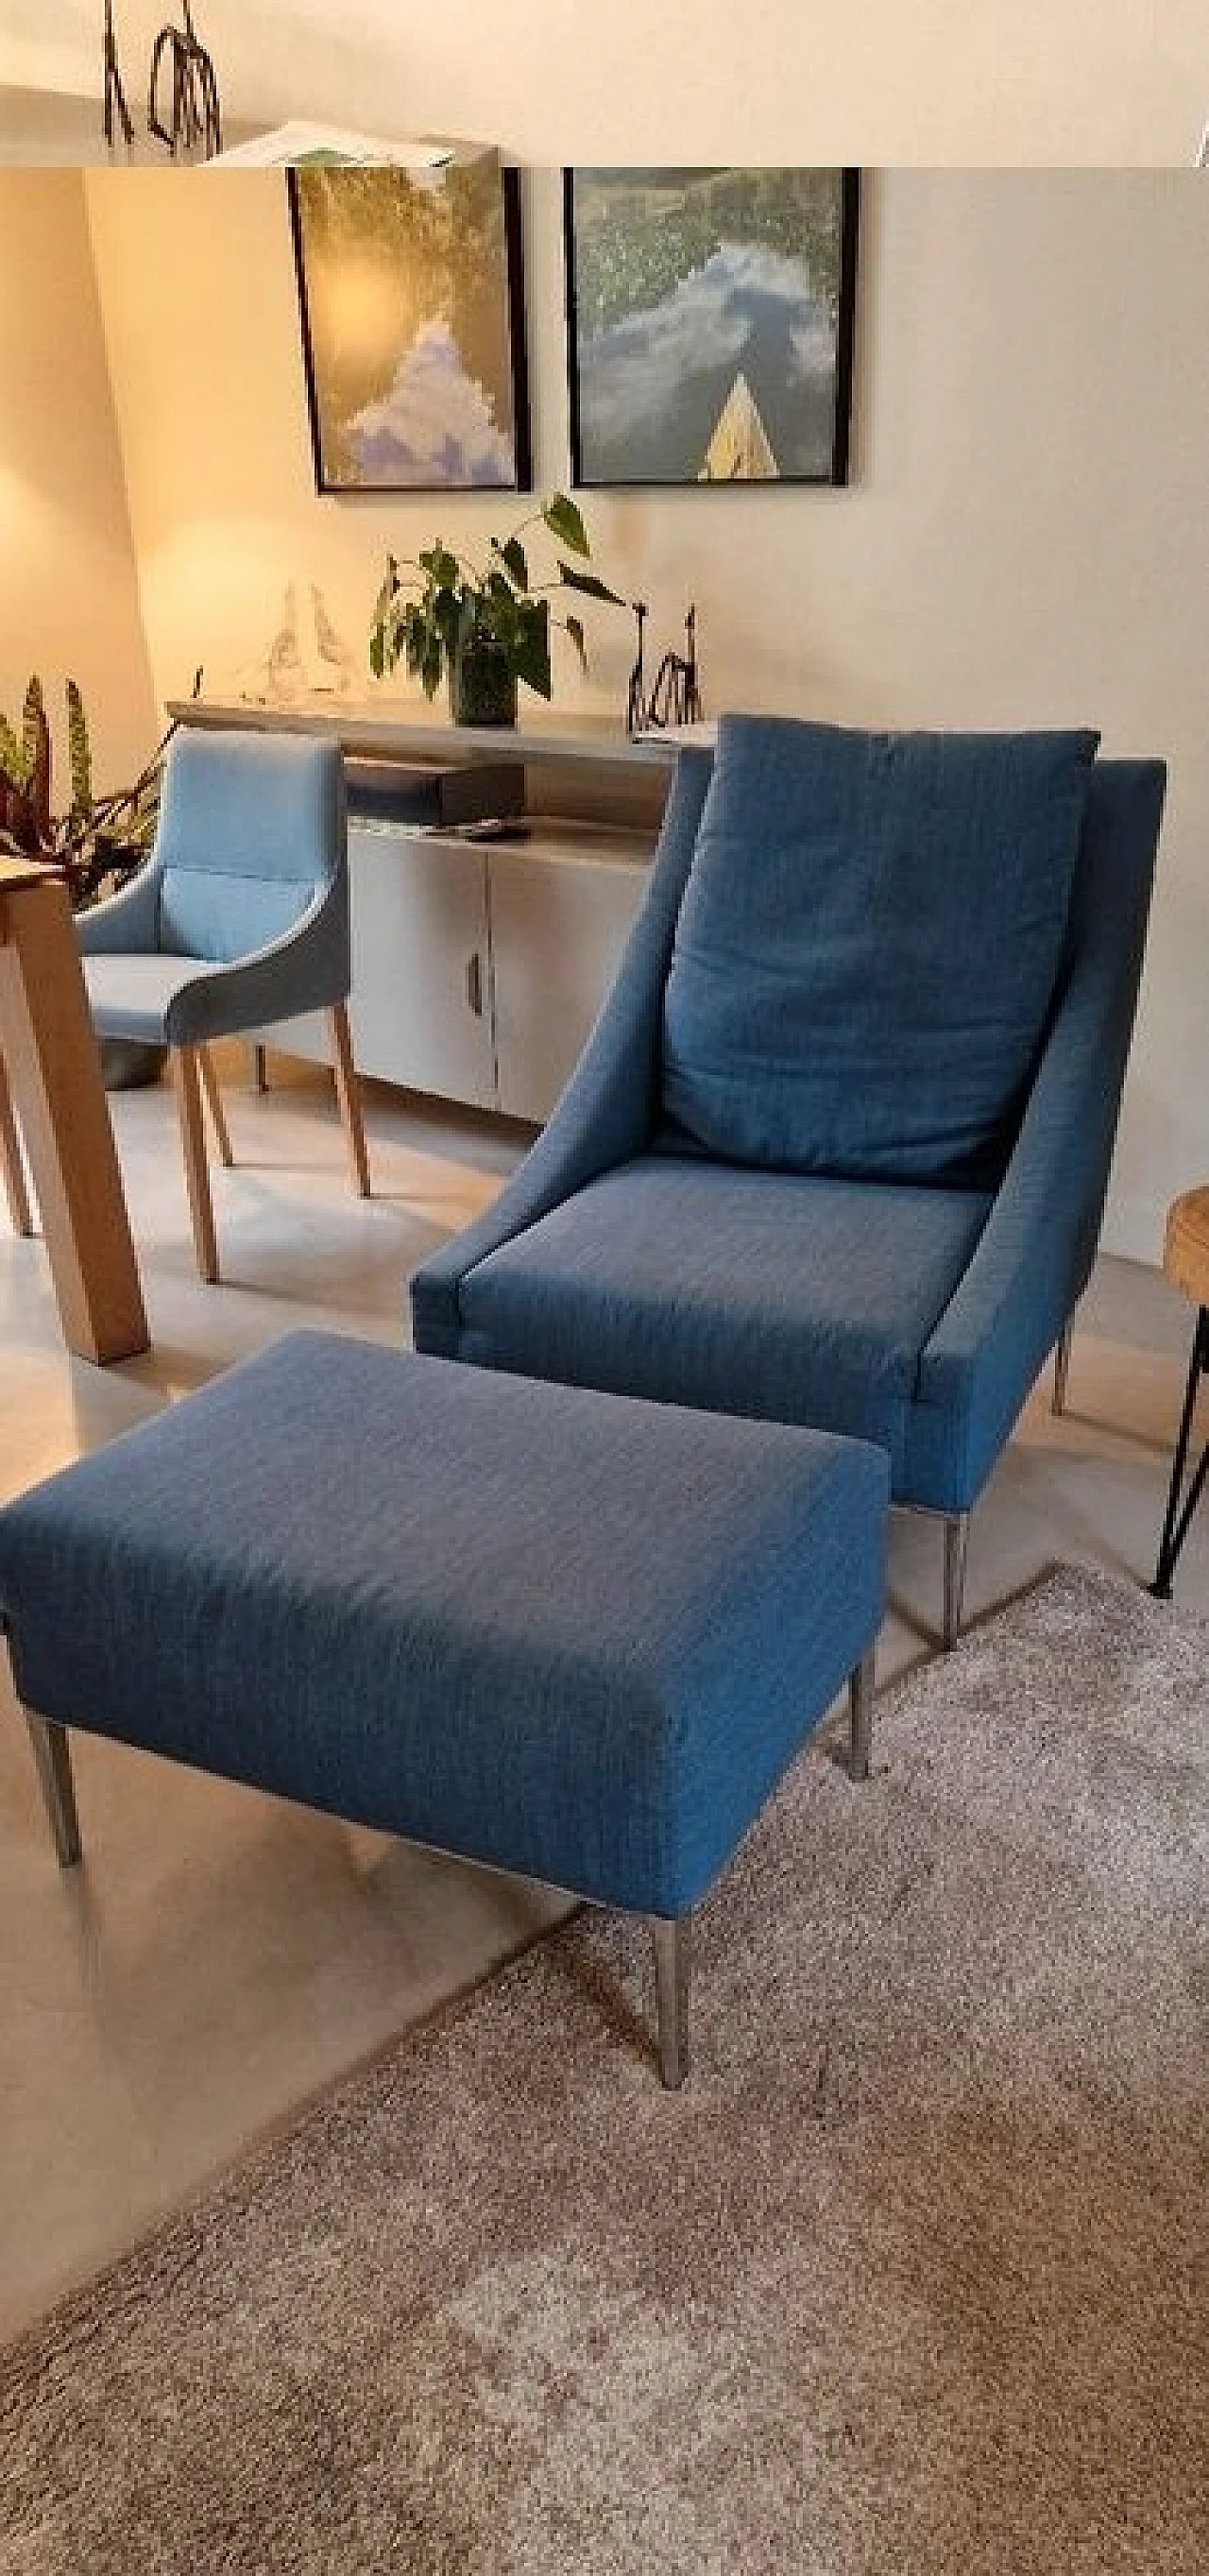 Jean armchair and pouf in blue by A. Citterio for B&B Italia, 2013 11